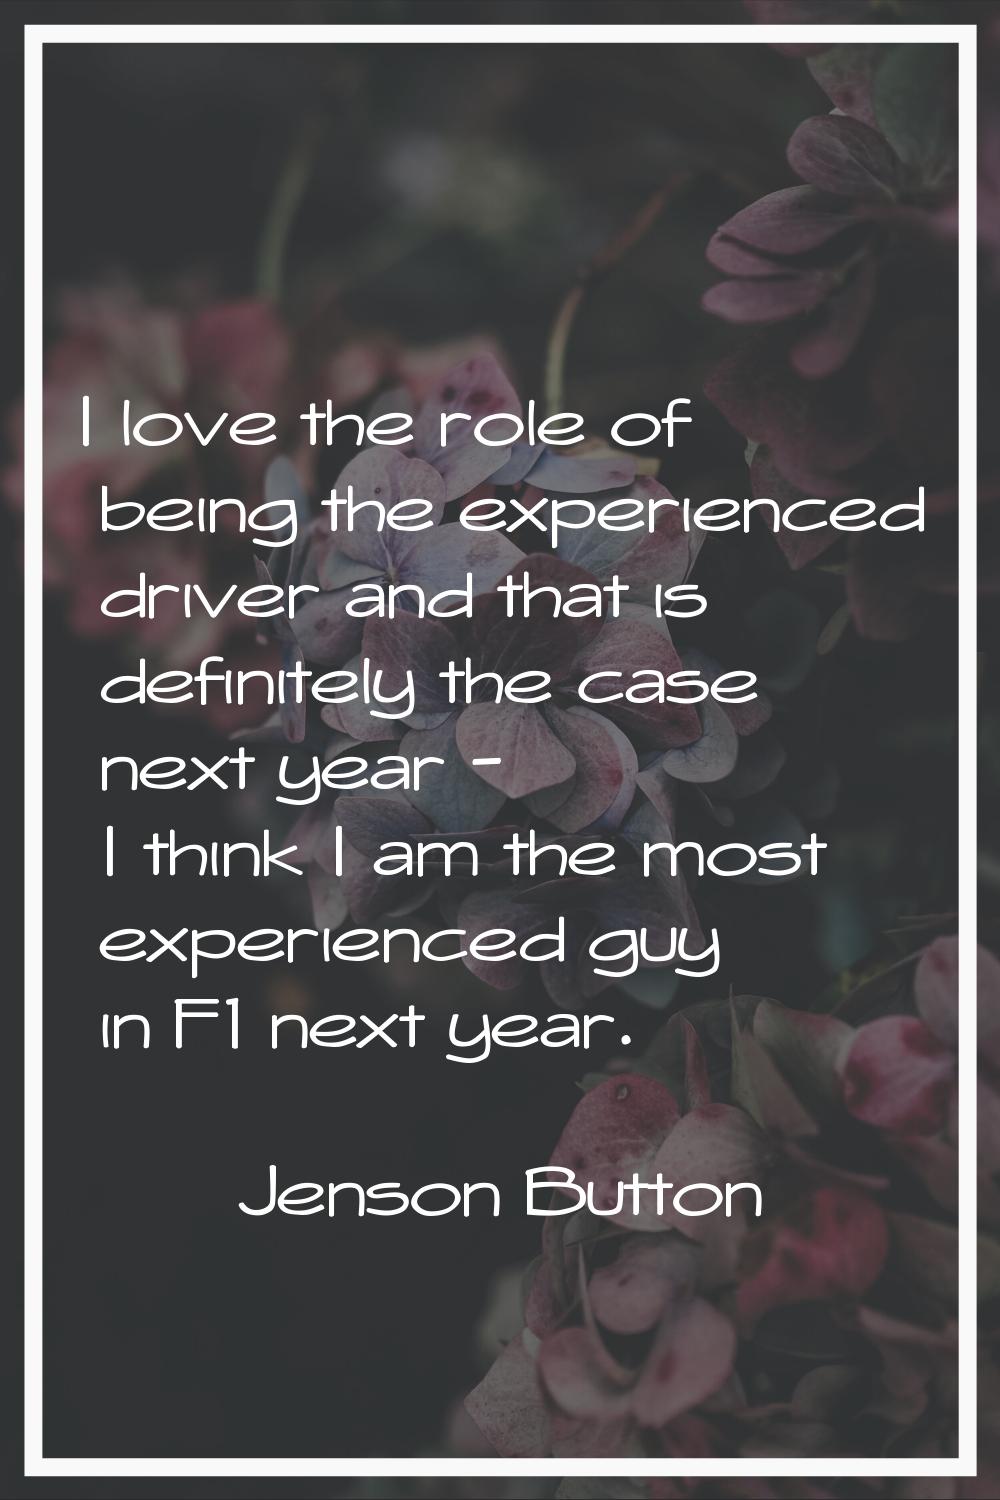 I love the role of being the experienced driver and that is definitely the case next year - I think